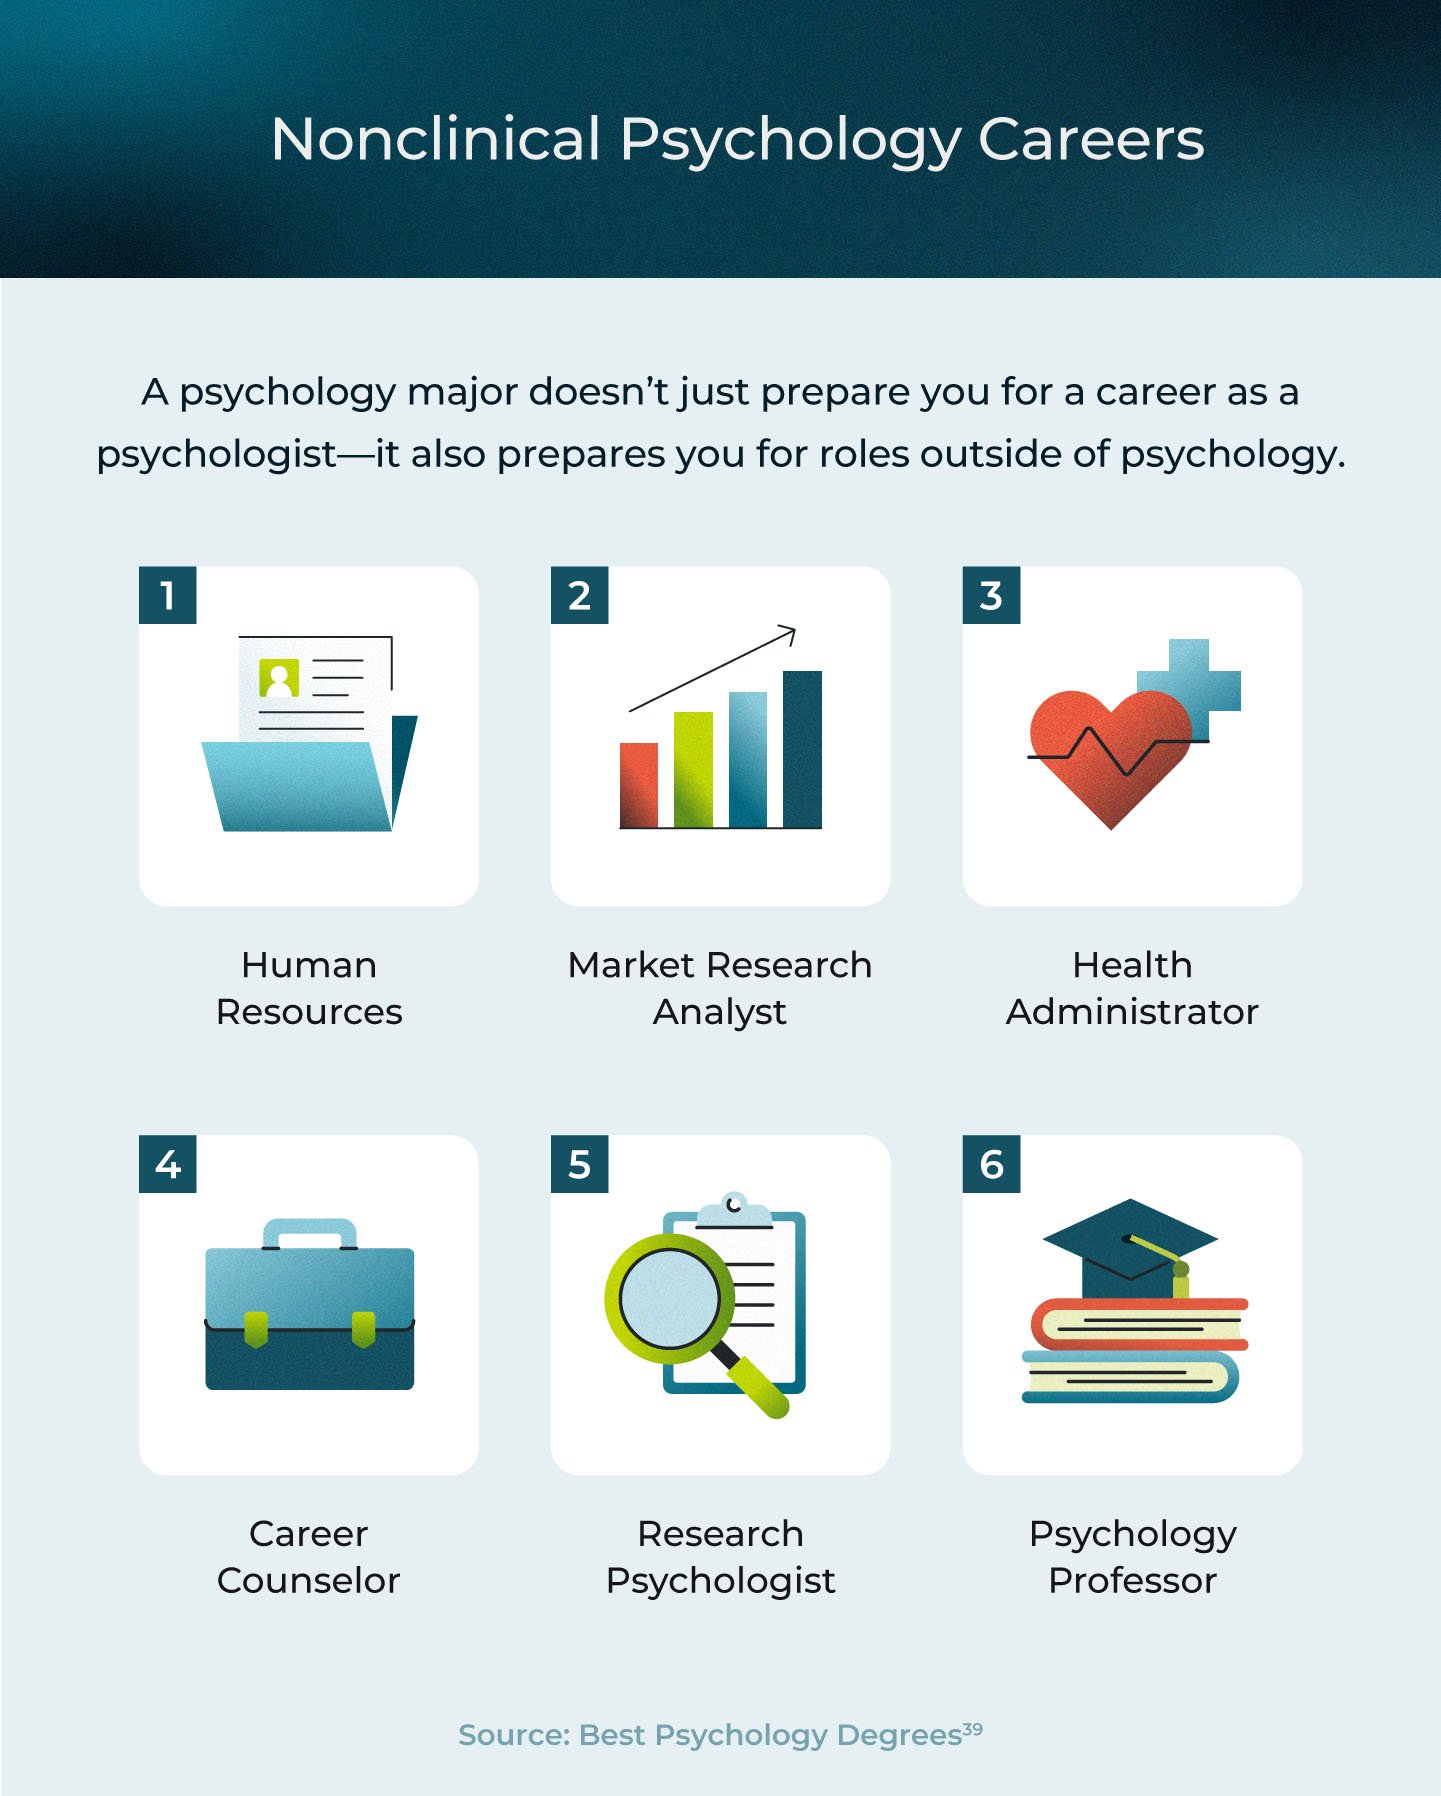 List of nonclinical careers for psychology majors.